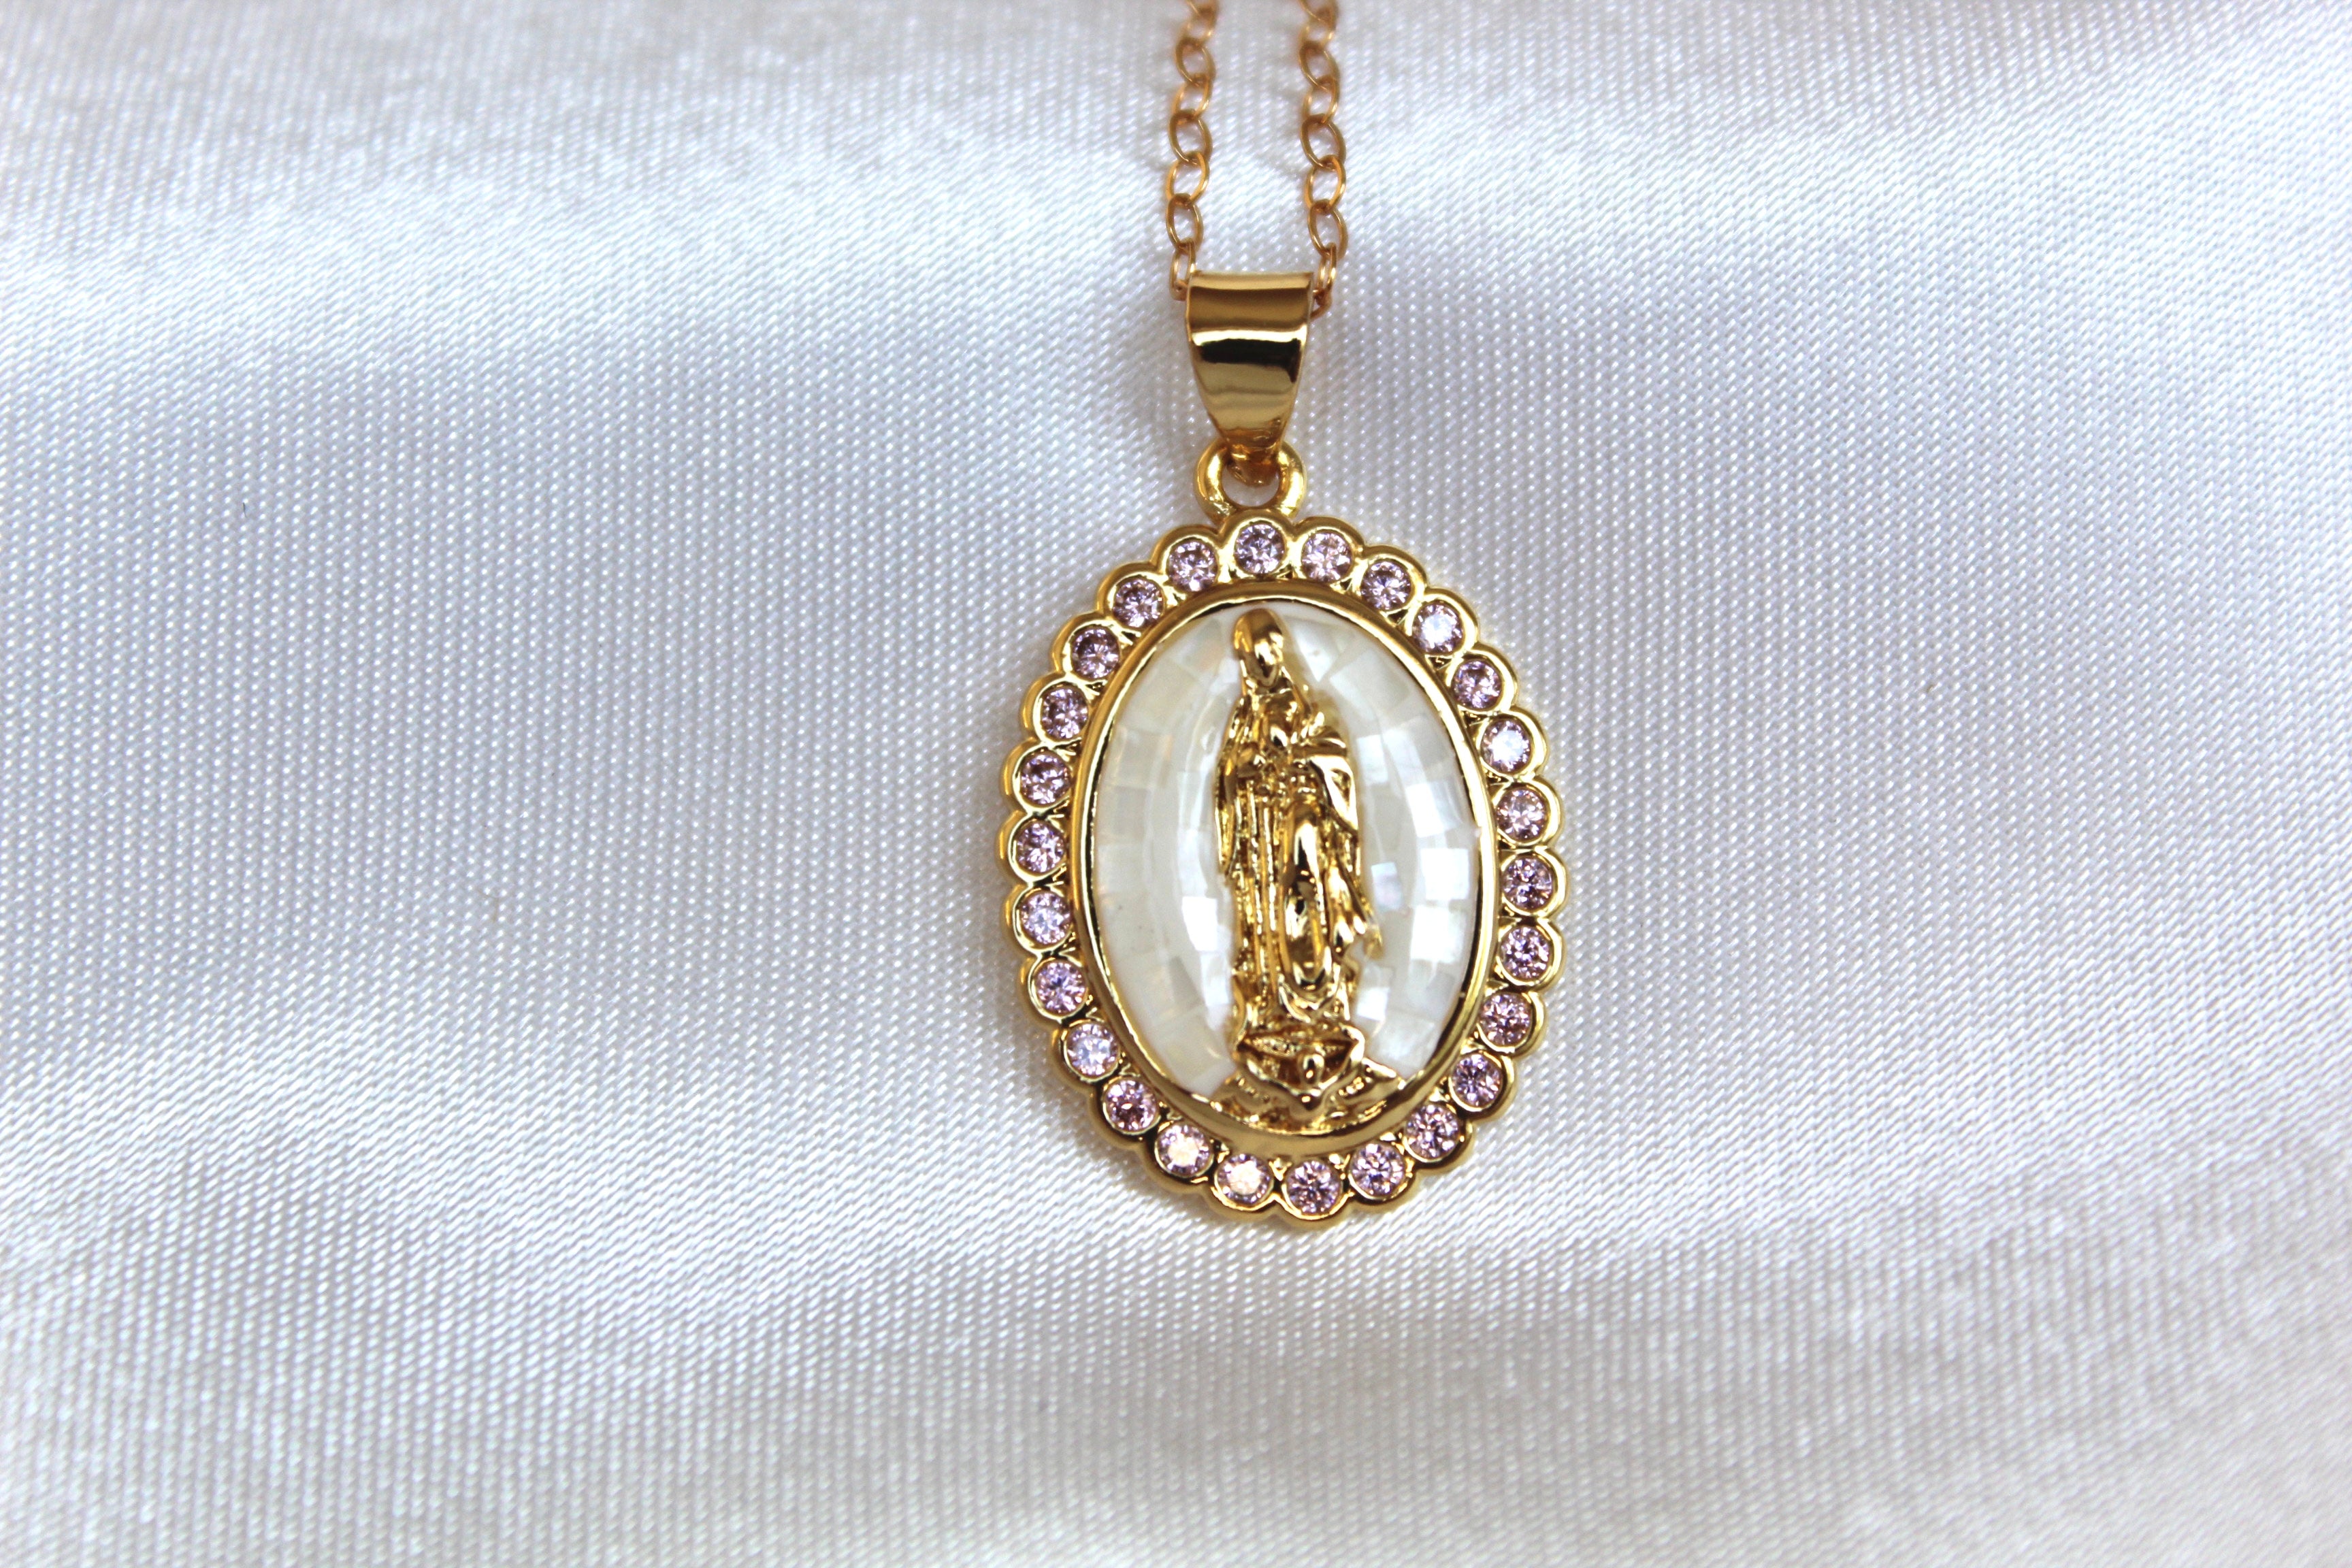 10k Real Solid Gold Our Lady of Guadalupe Necklace With Diamond Cut Finish,  La Virgen De Guadalupe Pendant With Option to Add Gold Chain - Etsy